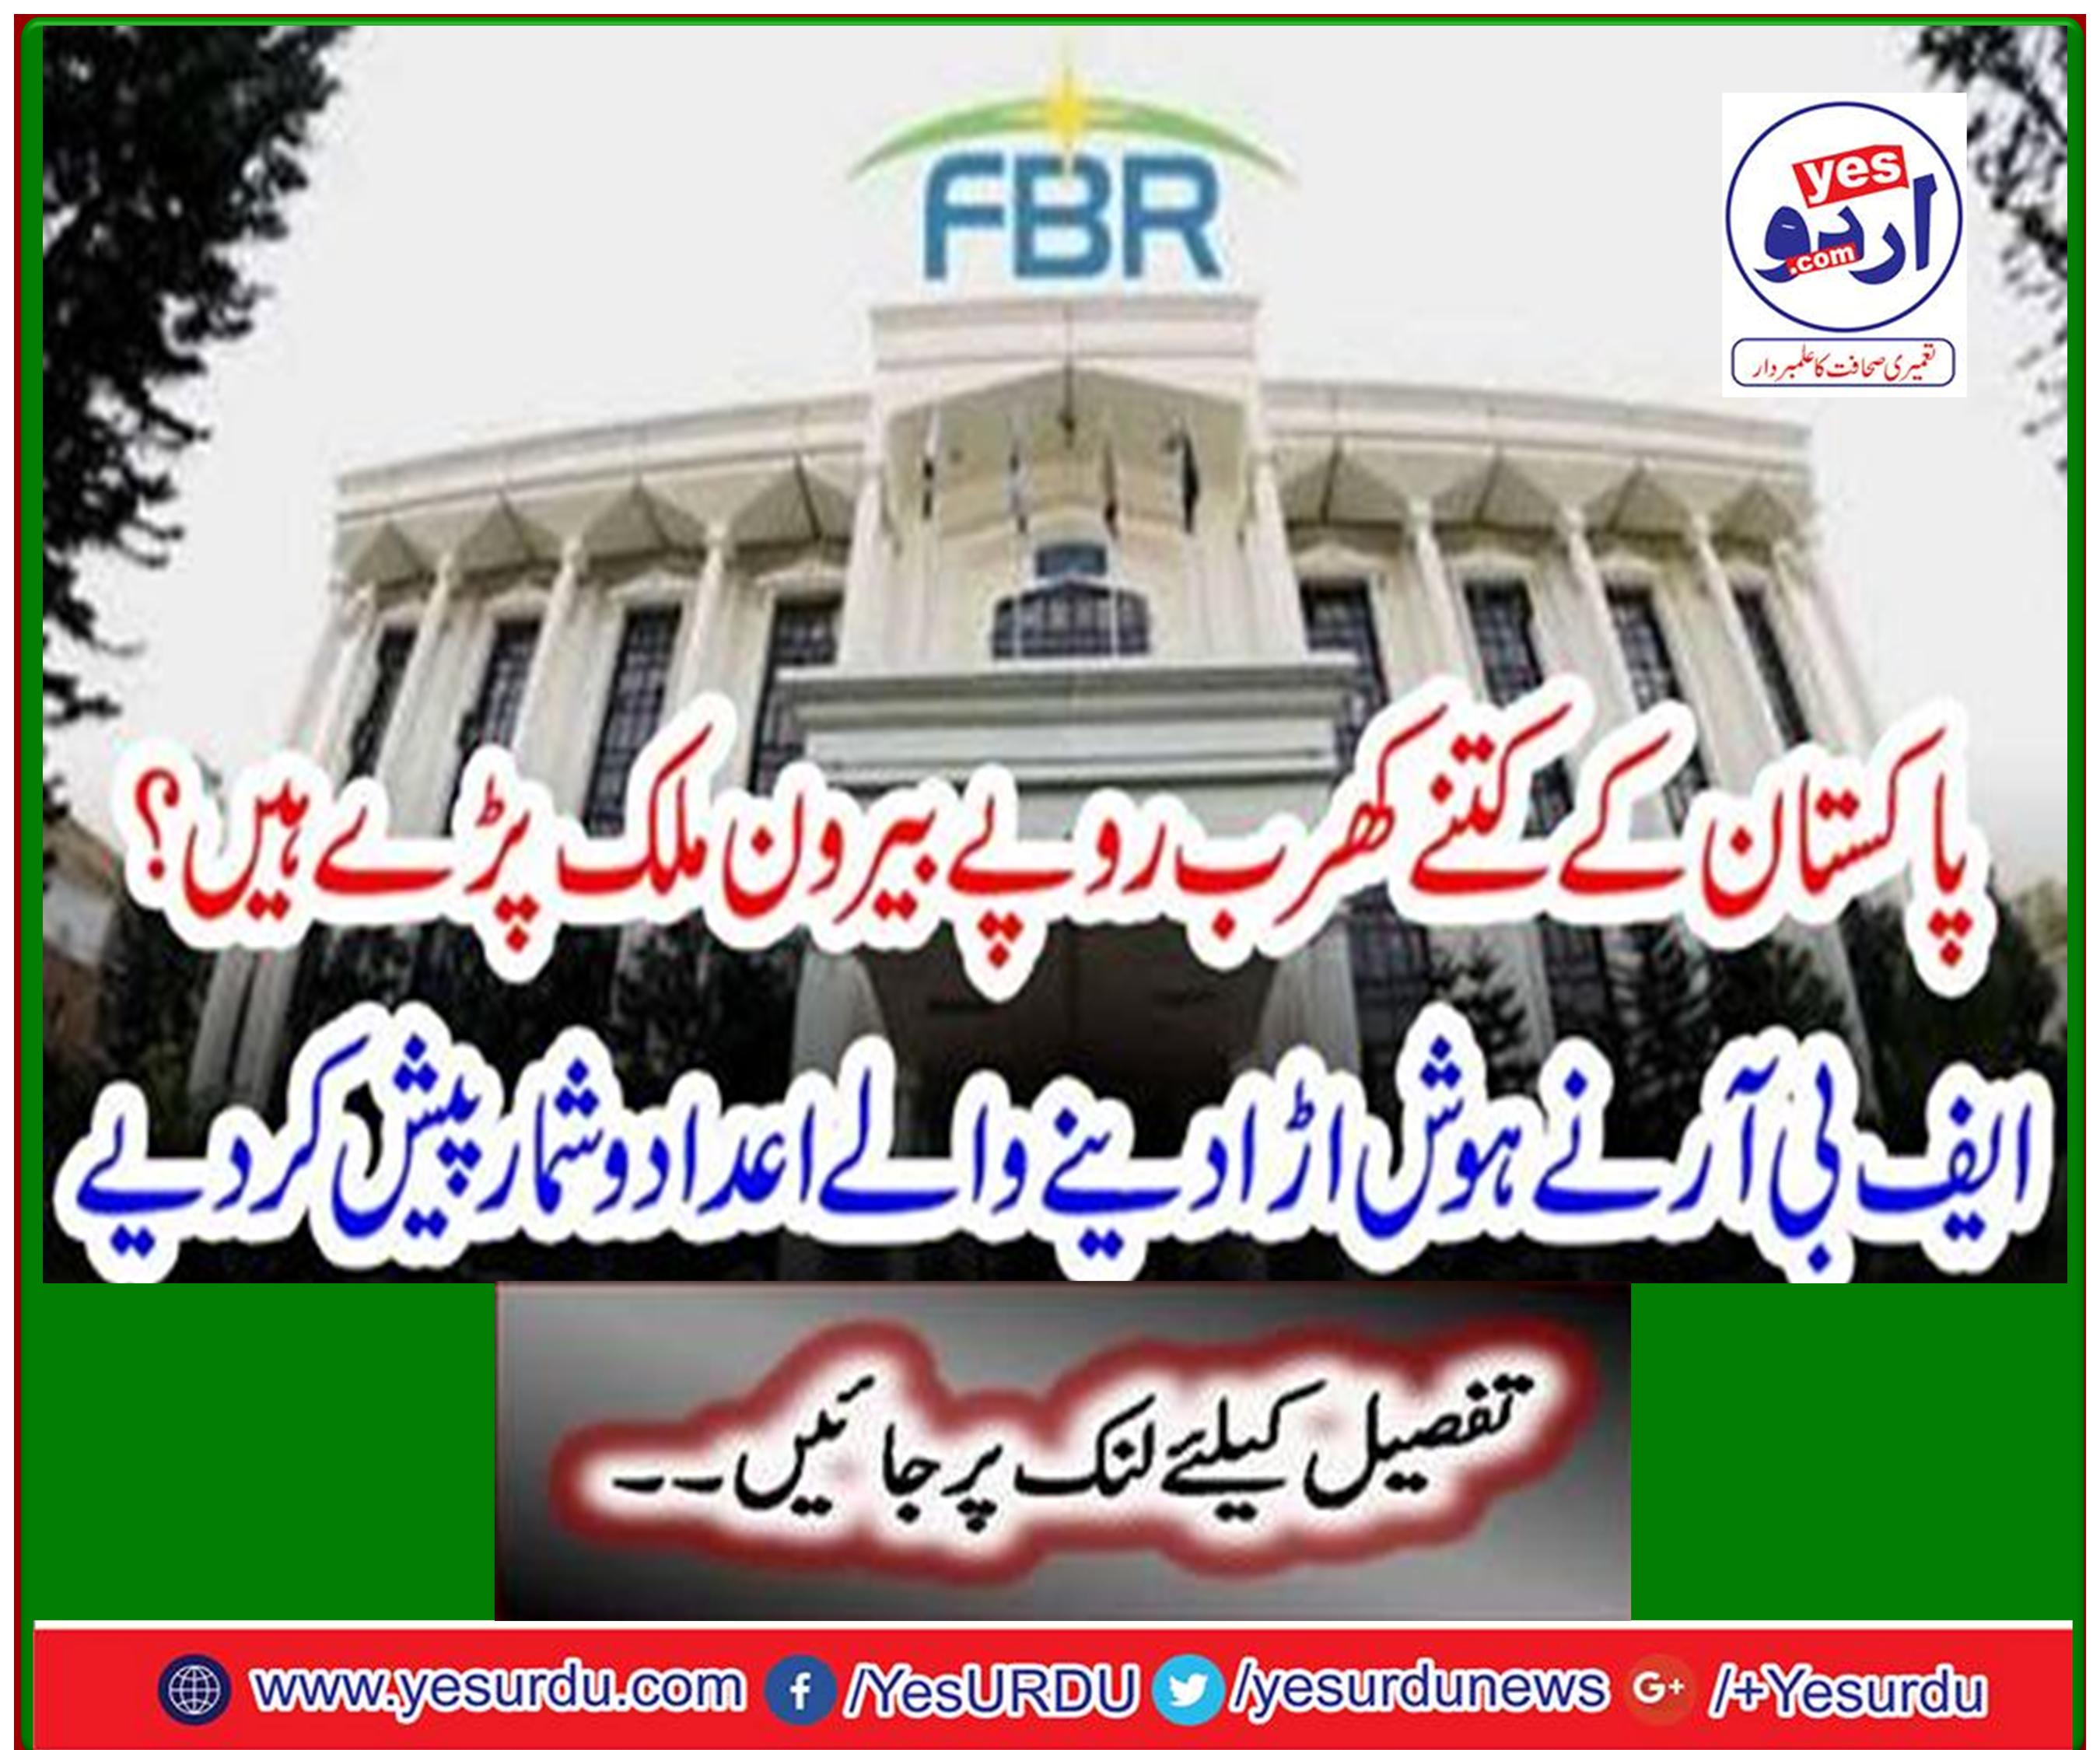 How many trillion rupees of Pakistan are lying abroad? The FBR provided astonishing statistics